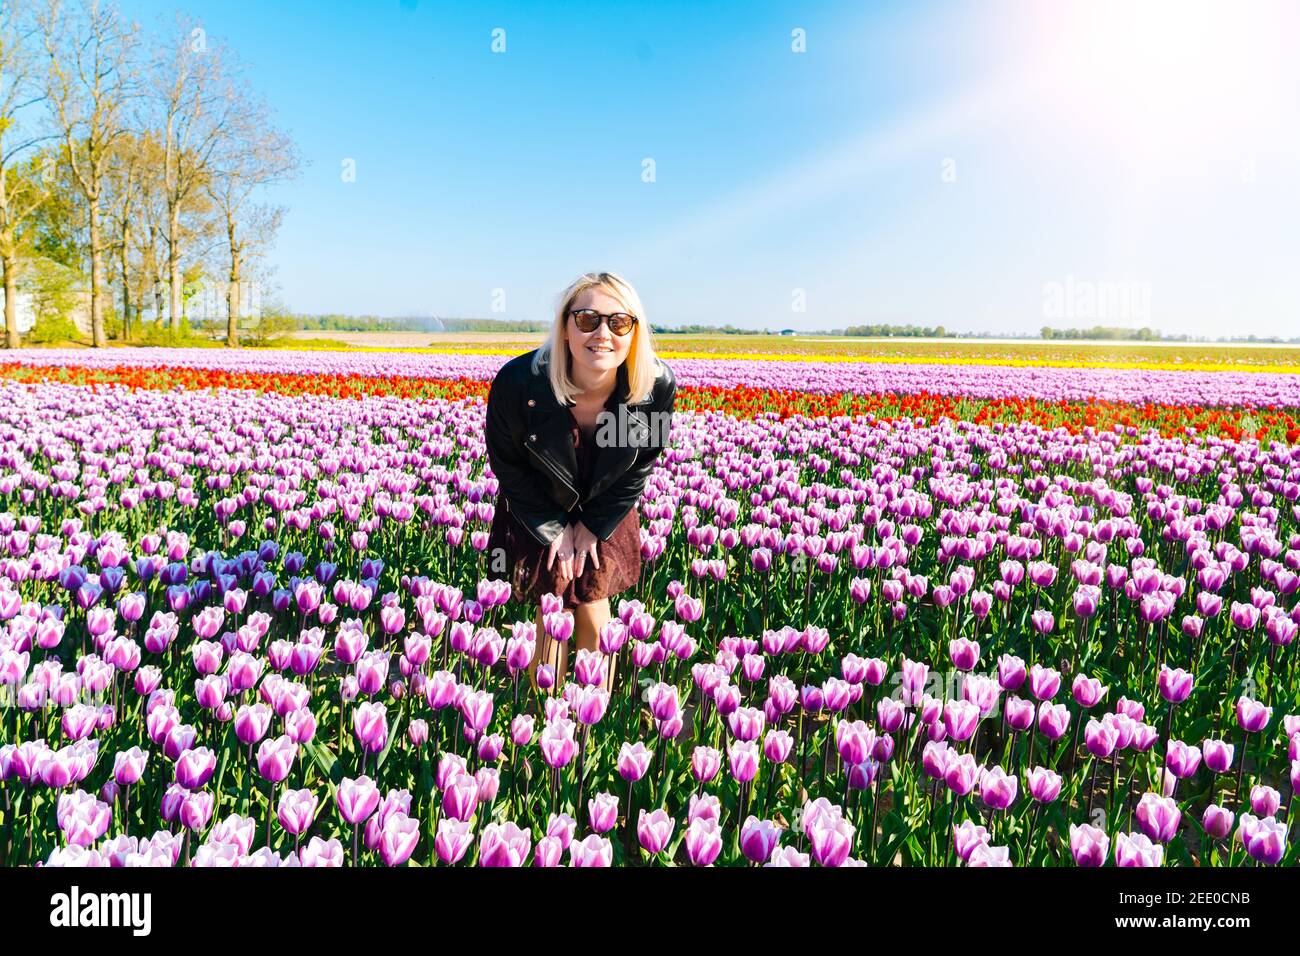 Beautiful Woman with blond hair standing in colorful tulip flower ...